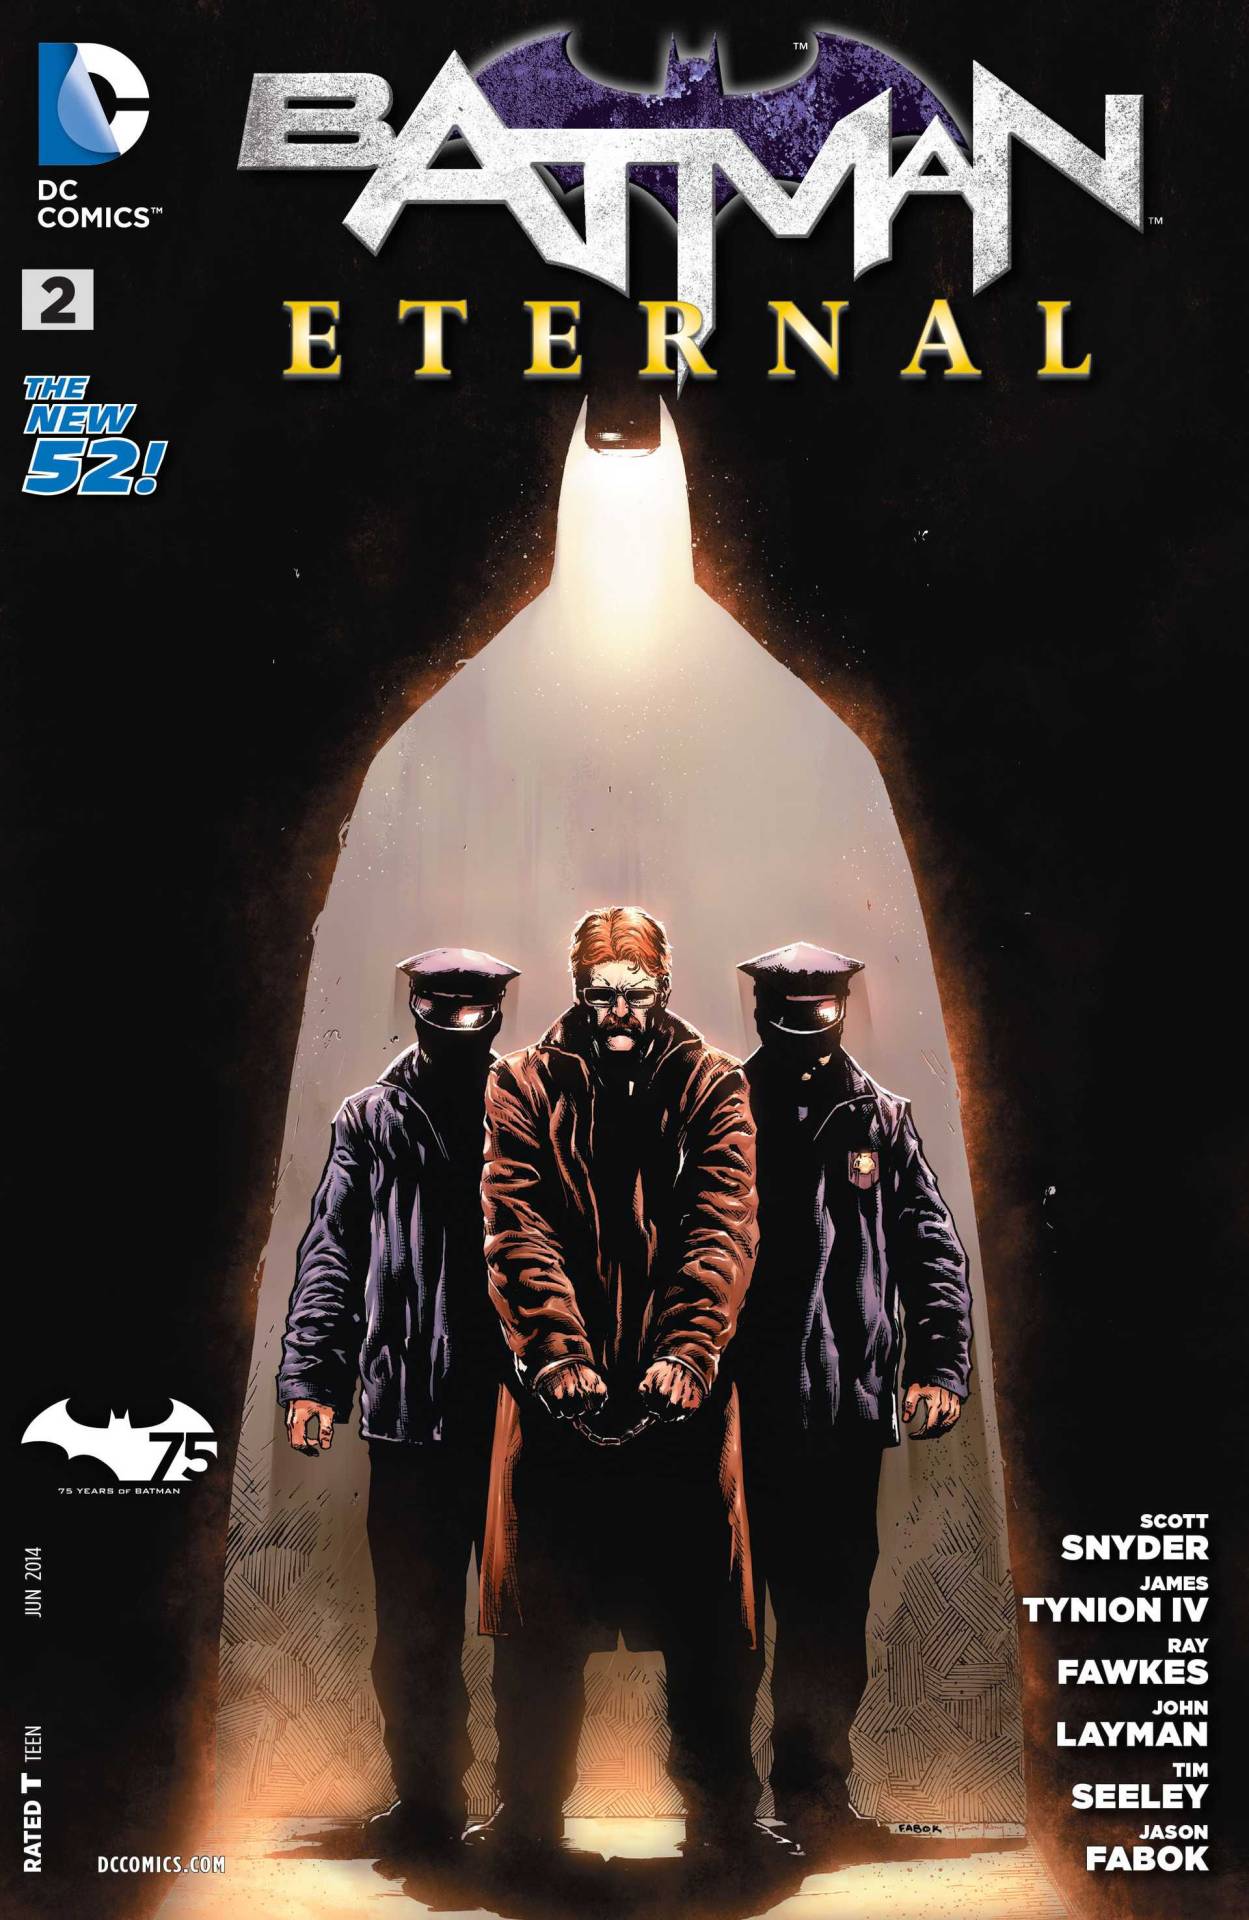 Batman: Eternal #2 (Comics Review)
Last week DC began its first weekly title of the New 52, Batman: Eternal. This is a story that affects the entire Bat-family and has some deep repercussions for all the heroes involved here.